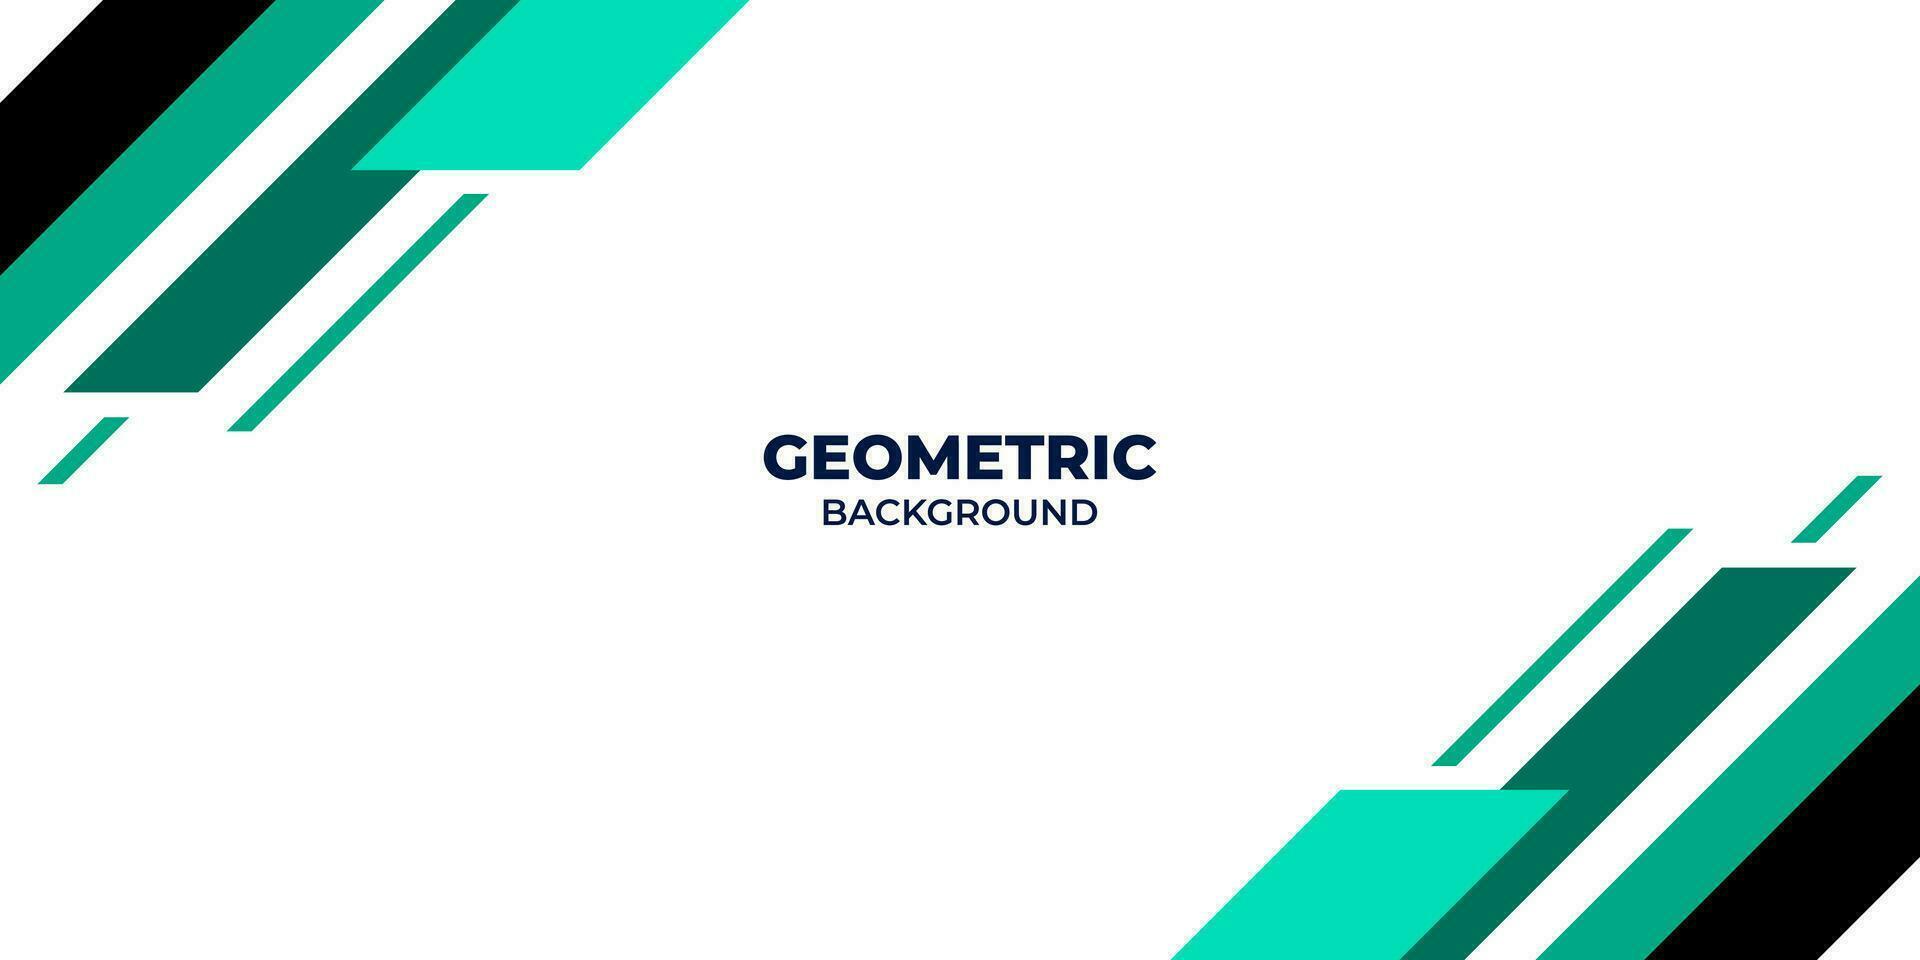 Abstract background for presentation with business concept and geometric shapes. Vector illustration